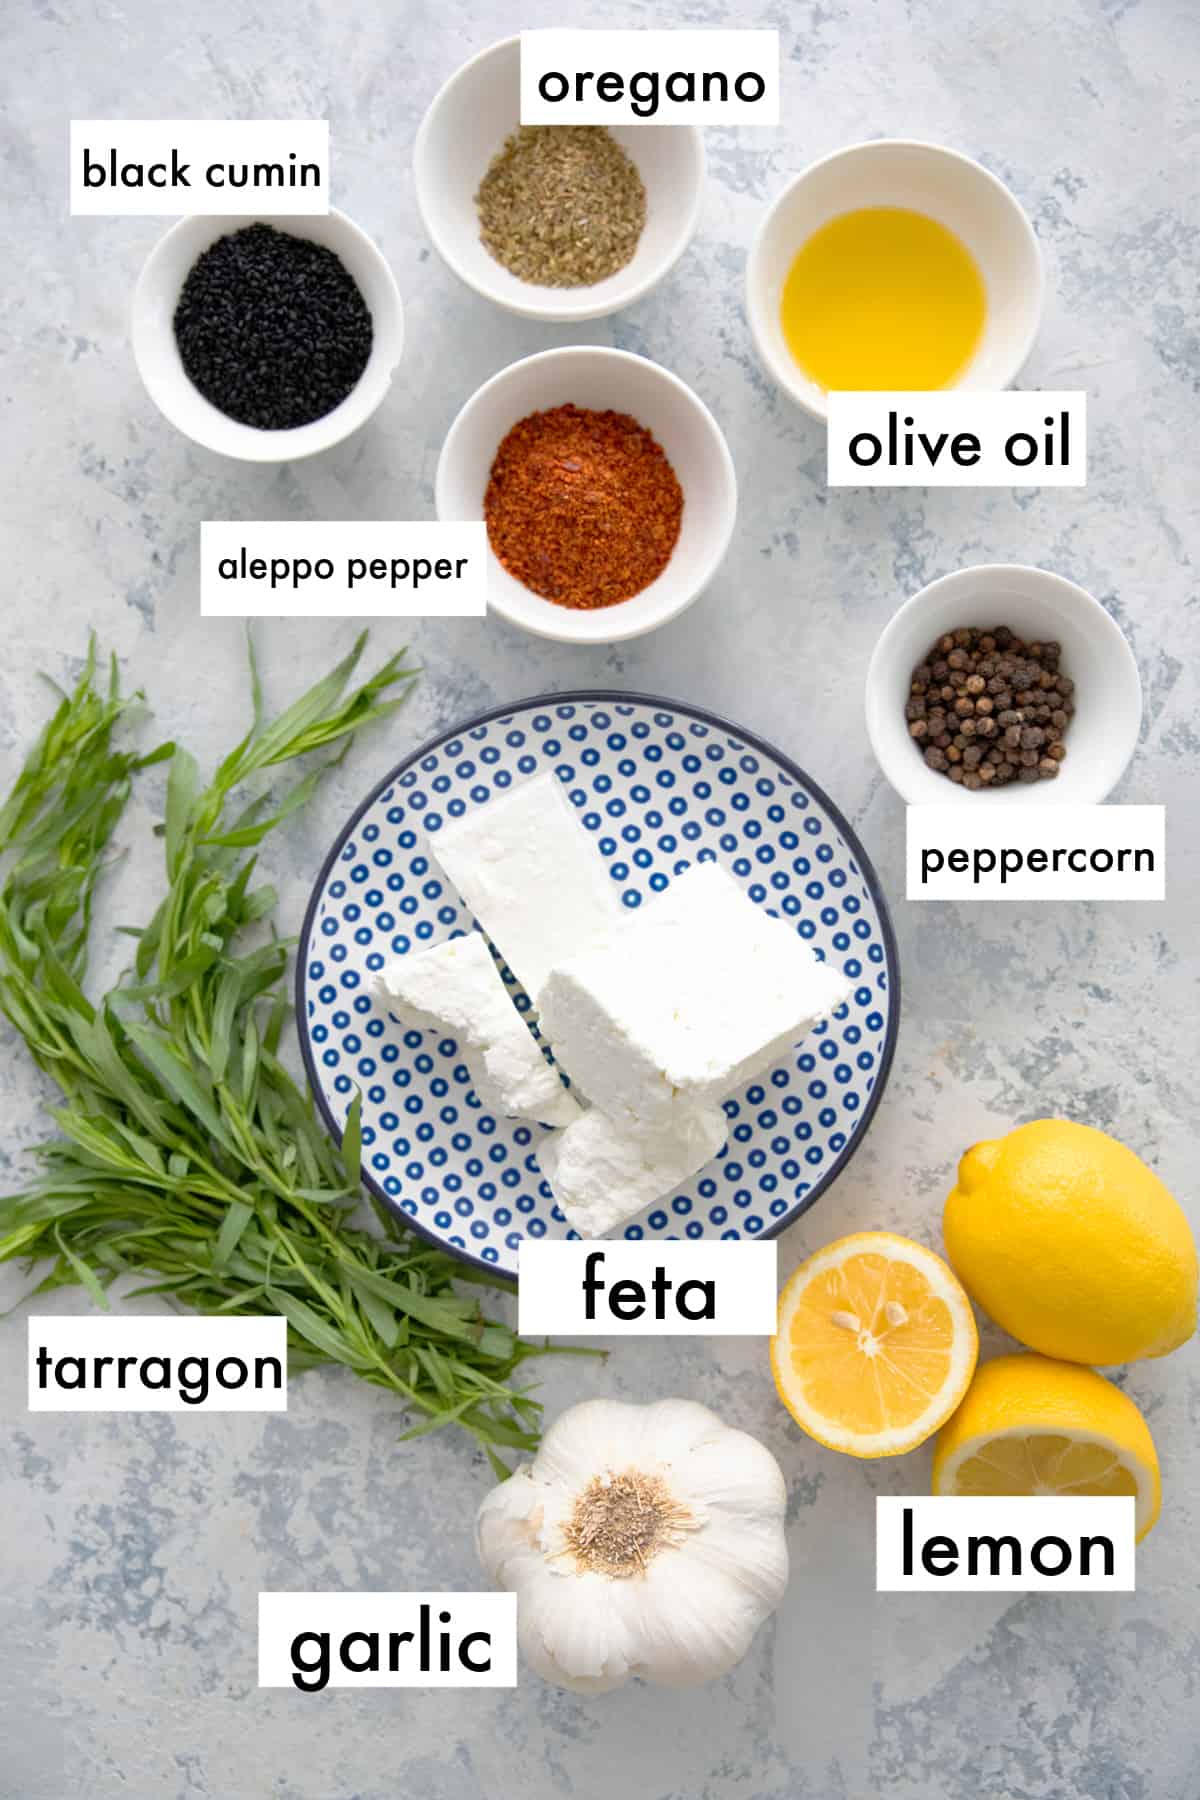 To make this recipe you need feta, olive oil, spices, herbs and garlic. 